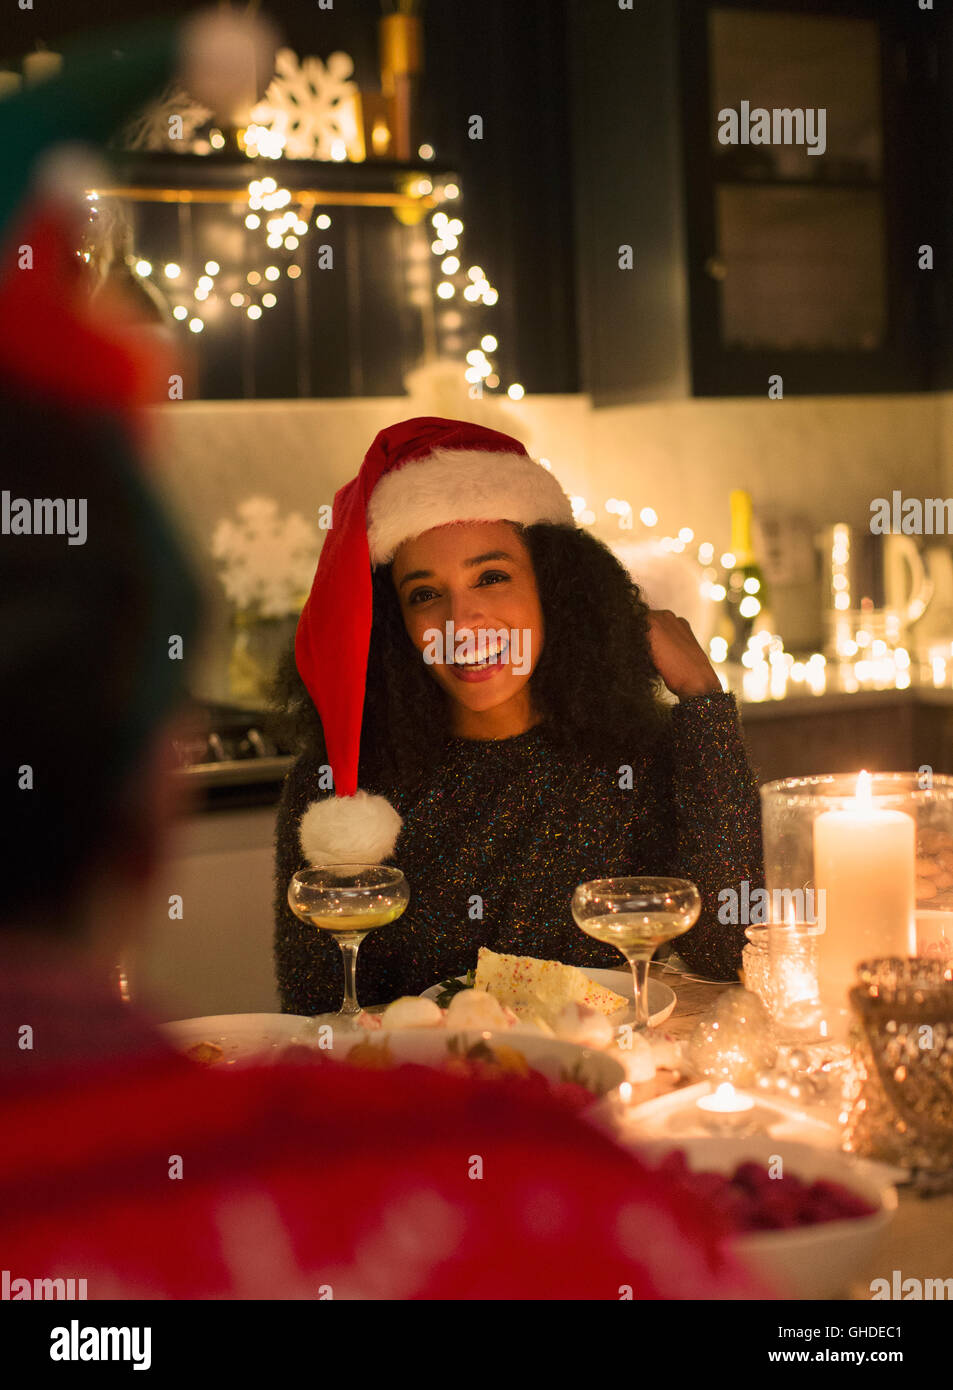 Smiling woman wearing Santa hat at candlelight Christmas dinner party Stock Photo